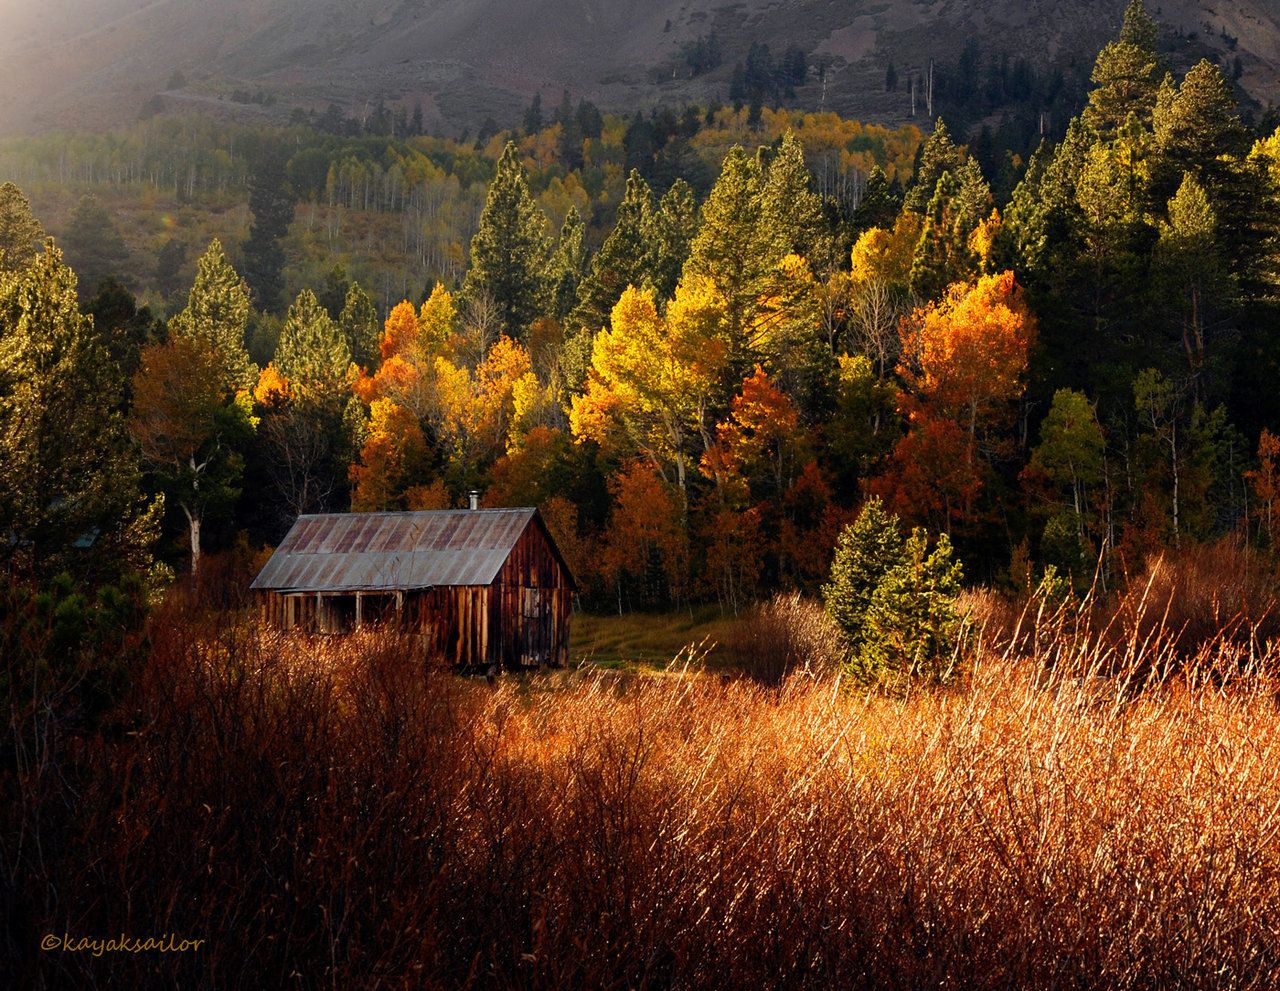 17 Cabin in the woods by kayaksailor 632 :: The Cabin In The Autumn Woods W...